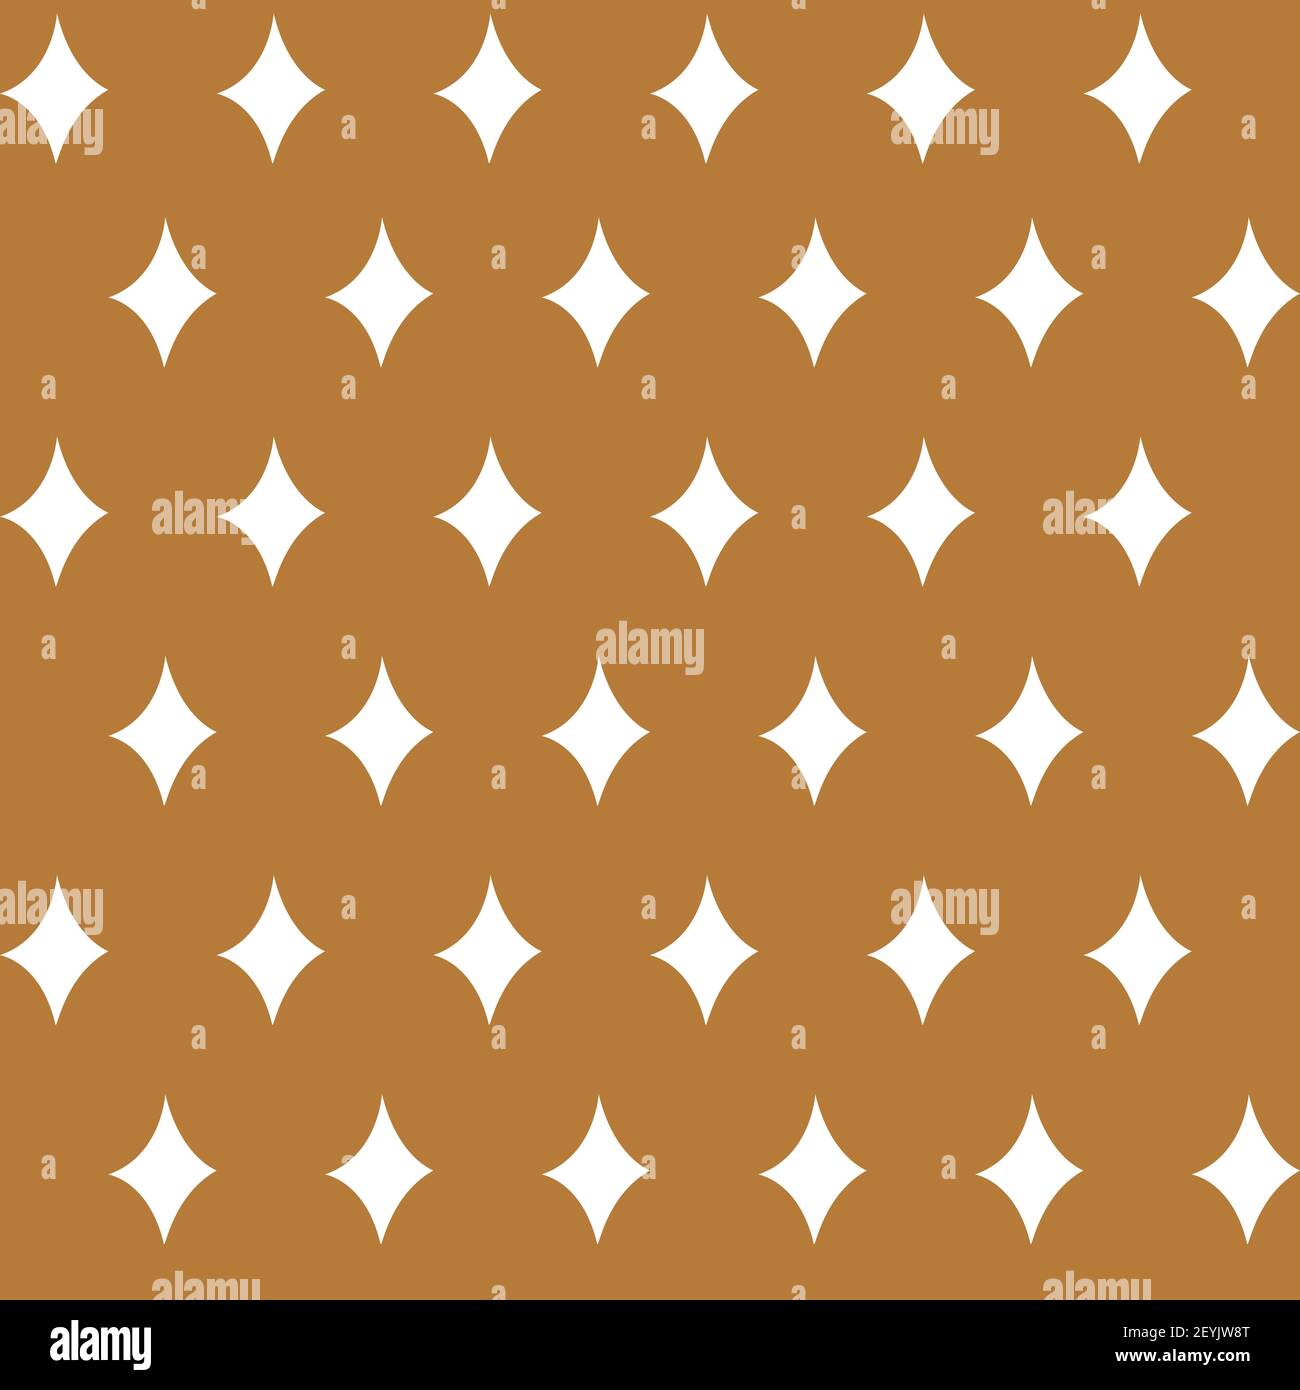 Diamond stars seamless christmas pattern - white figures on the gold background. Vector illustration made in the traditional style of hand drawing. Stock Vector